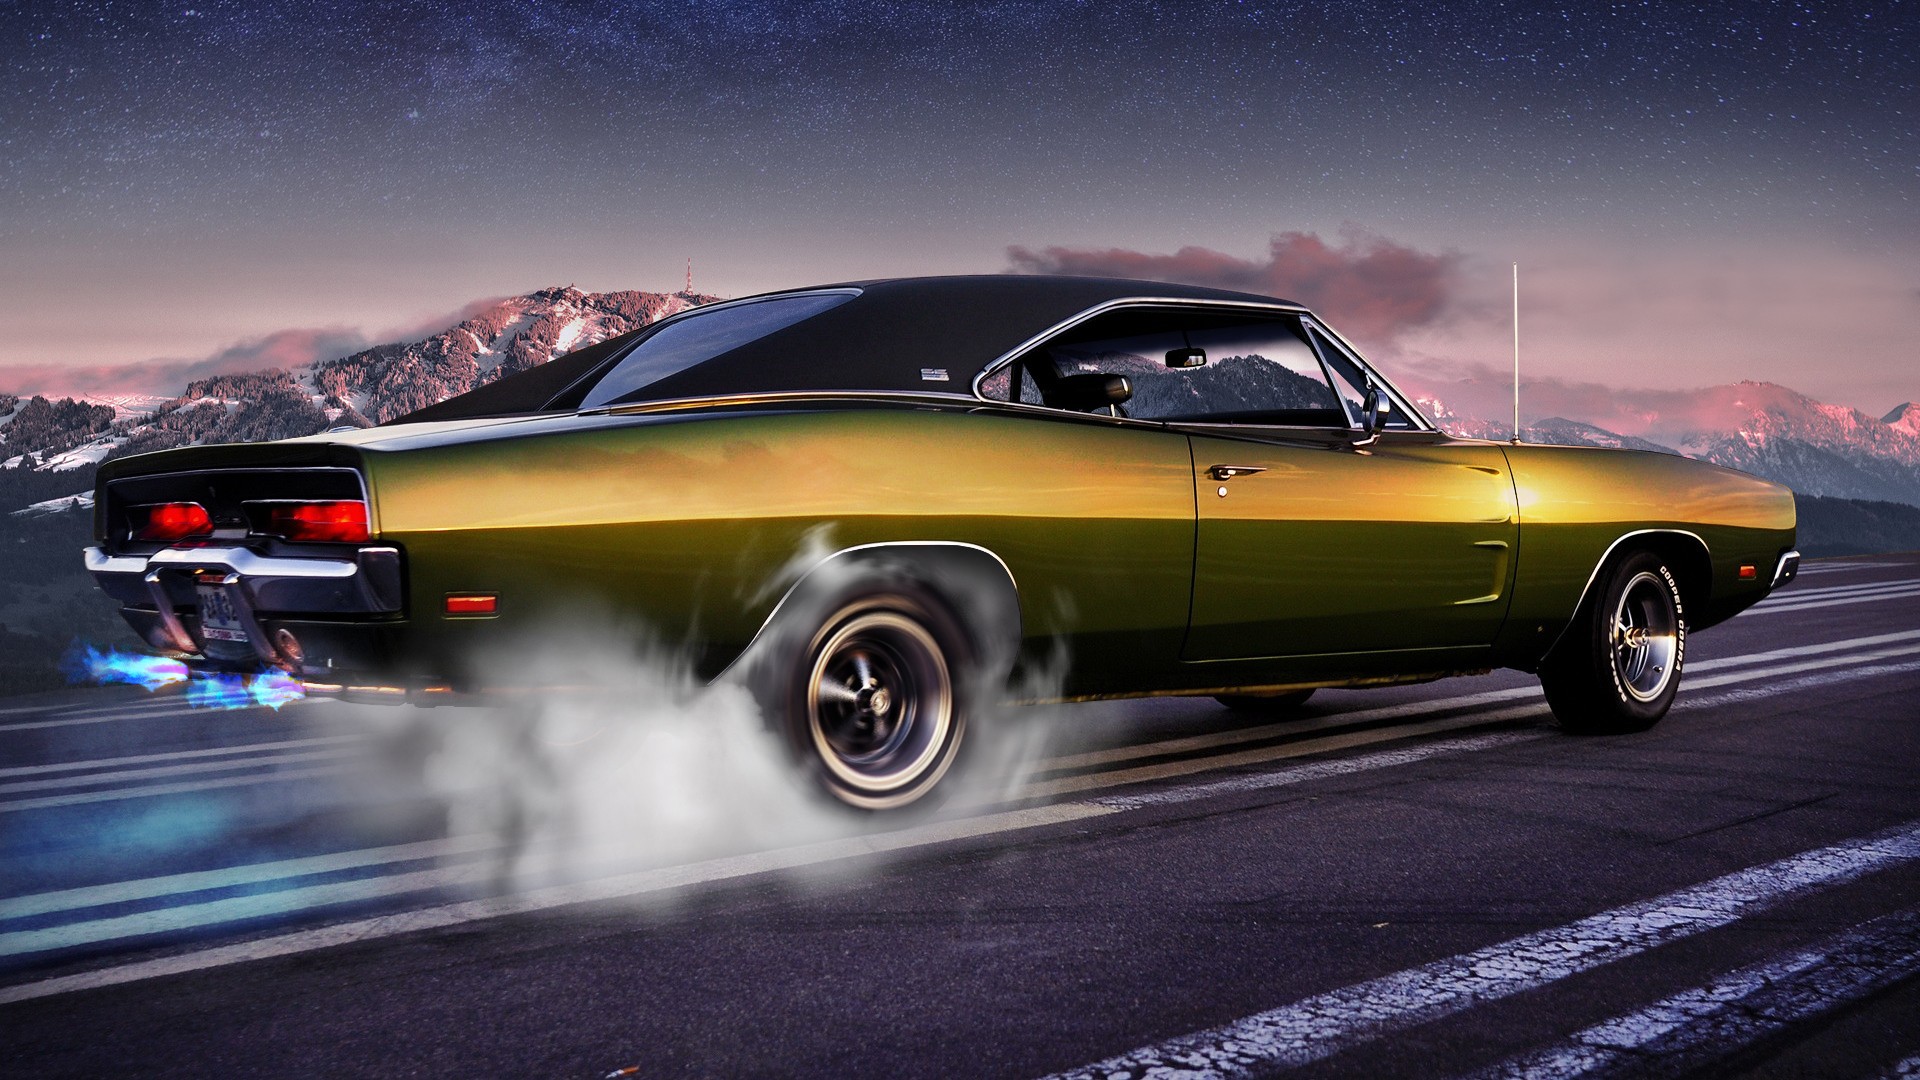 Muscle Car Backgrounds → Cars Gallery